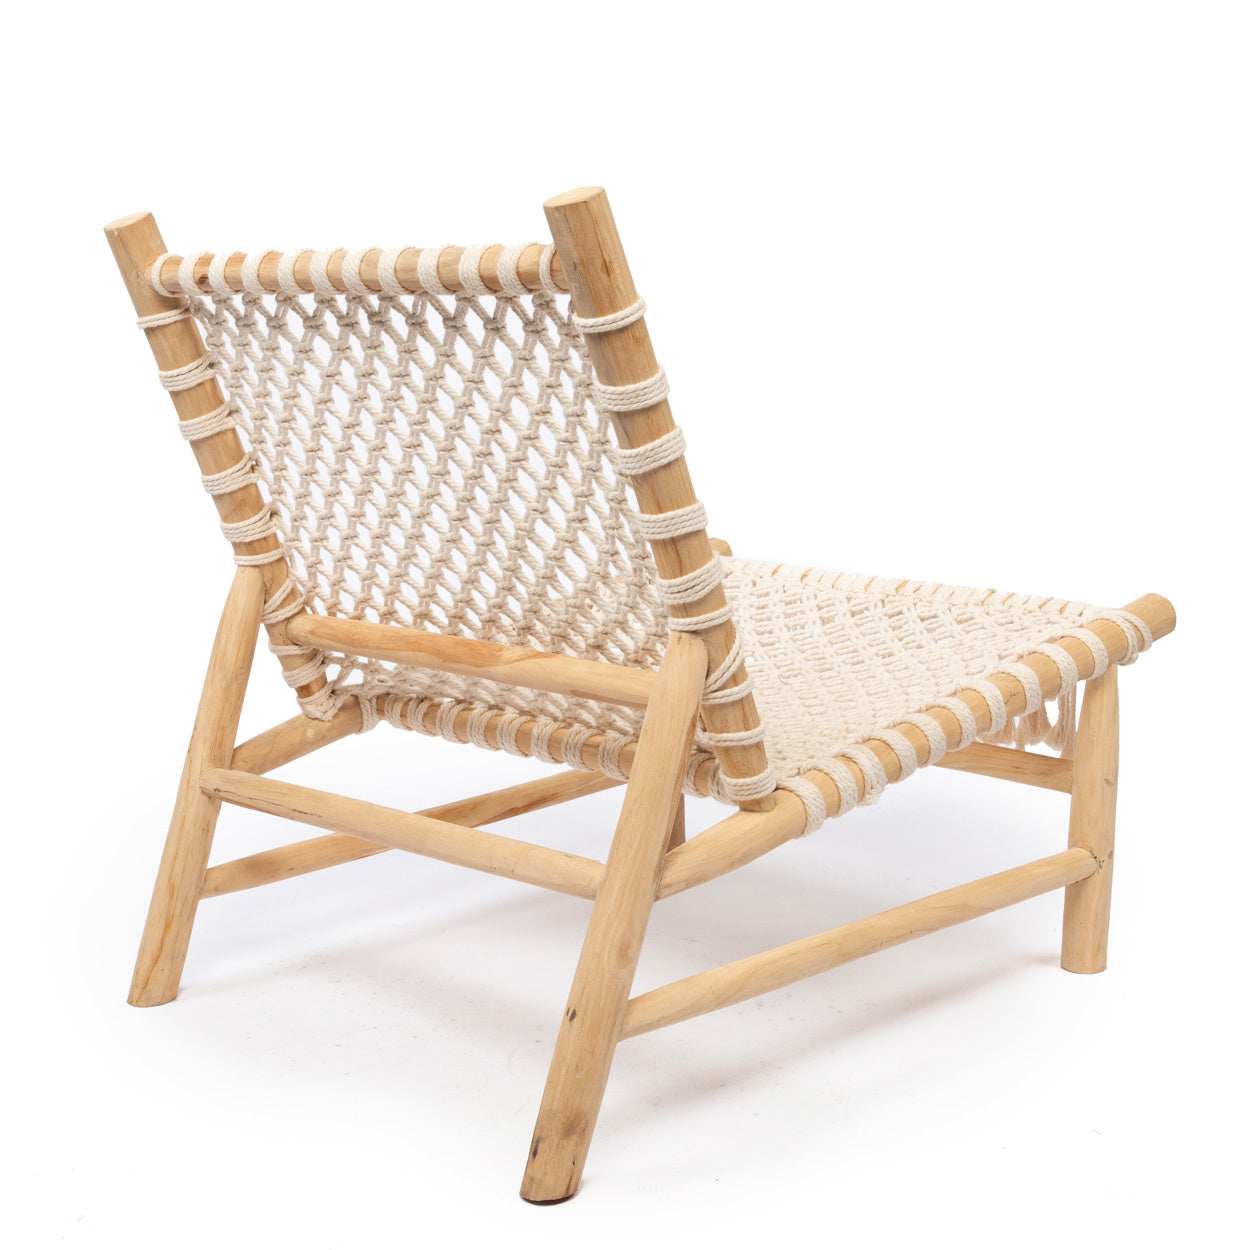 THE ISLAND Rope One Seater Chair backside view